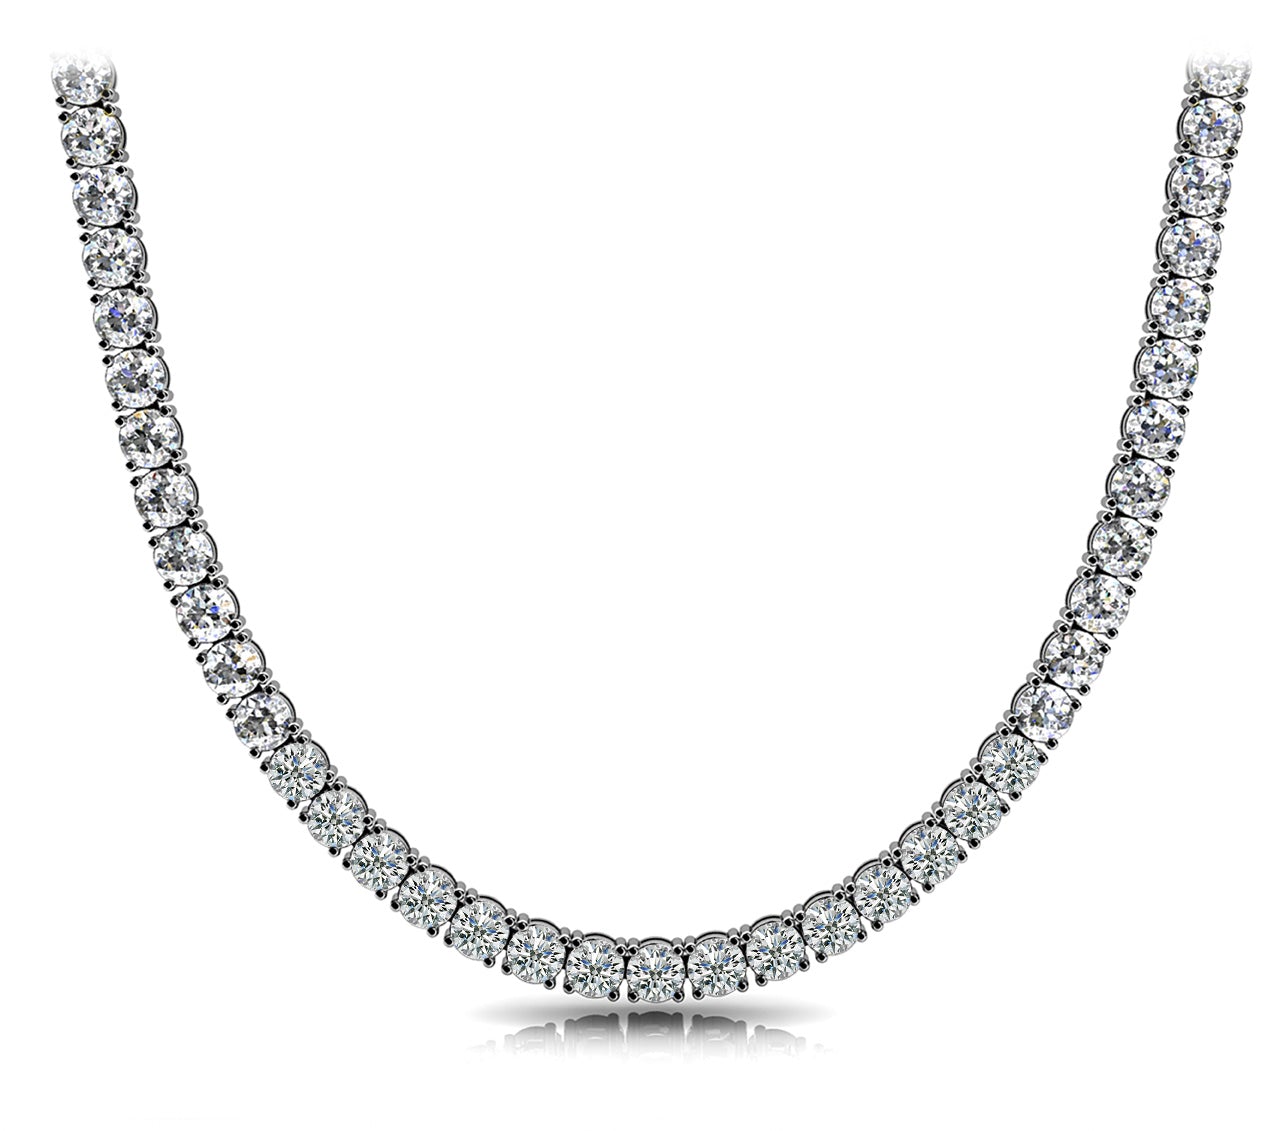 Diamond Tennis Necklace Round Cut 40 Carat 4 prong set in 18K White Gold Front View